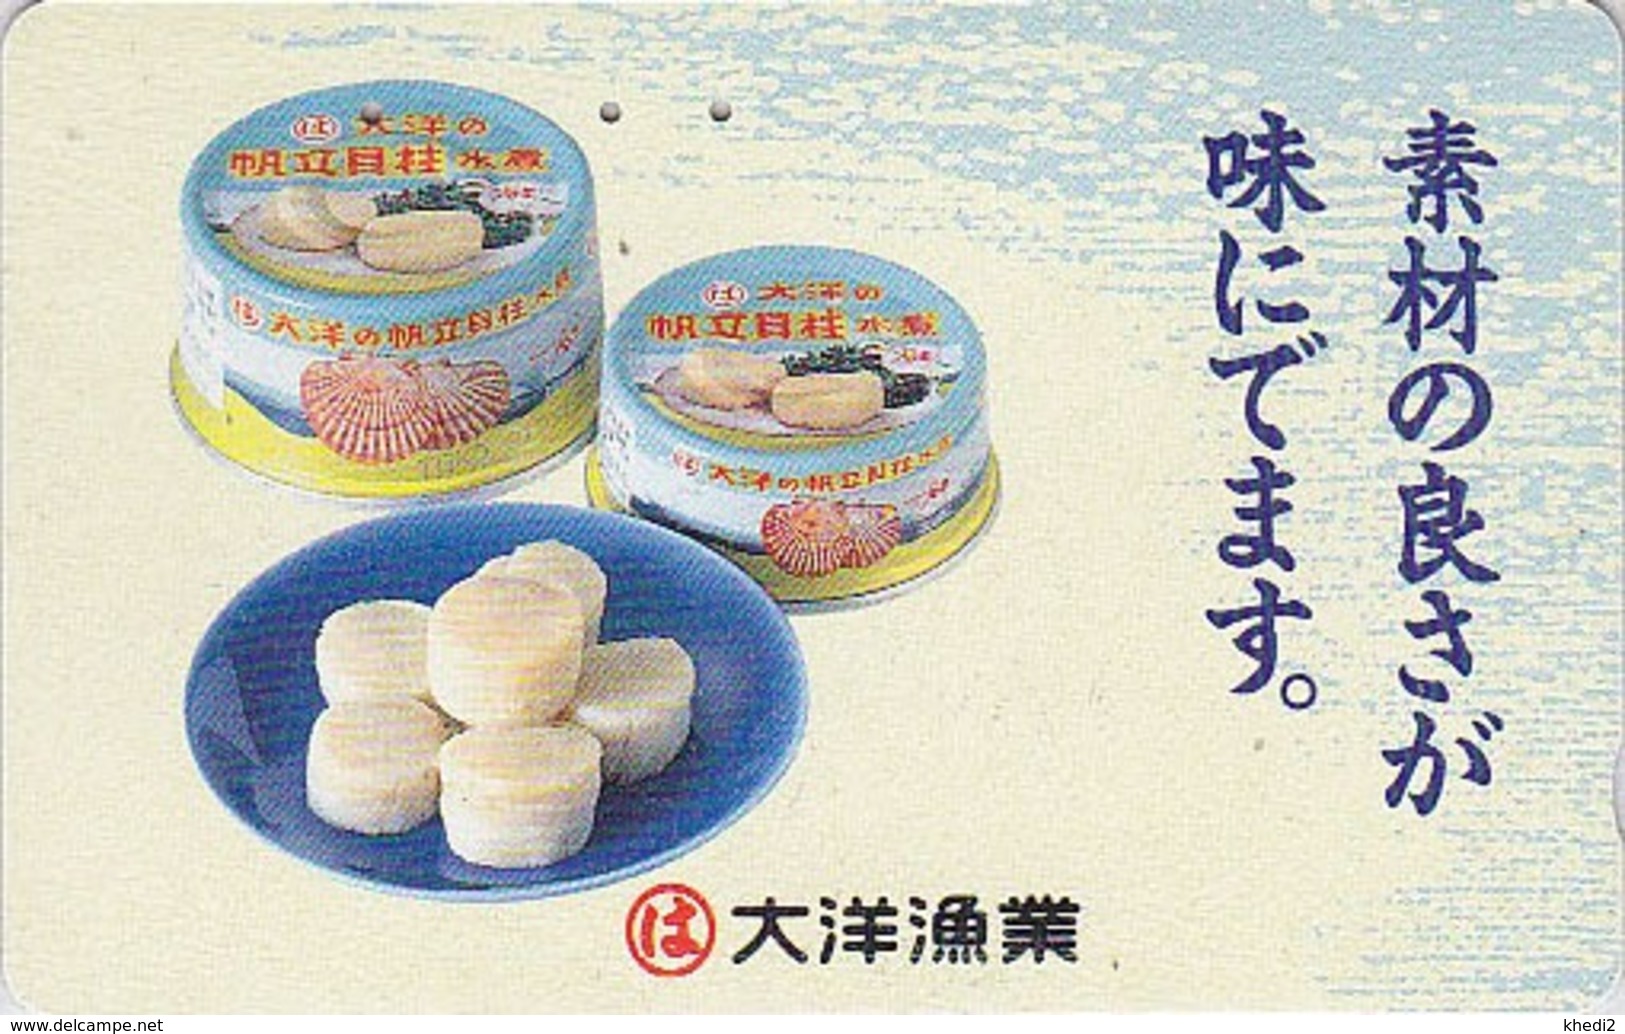 Télécarte Japon / 110-011 - COQUILLAGE & FROMAGE  - SHELL & CHEESE Japan Phonecard - MUSCHEL & KÄSE - 279 - Alimentation